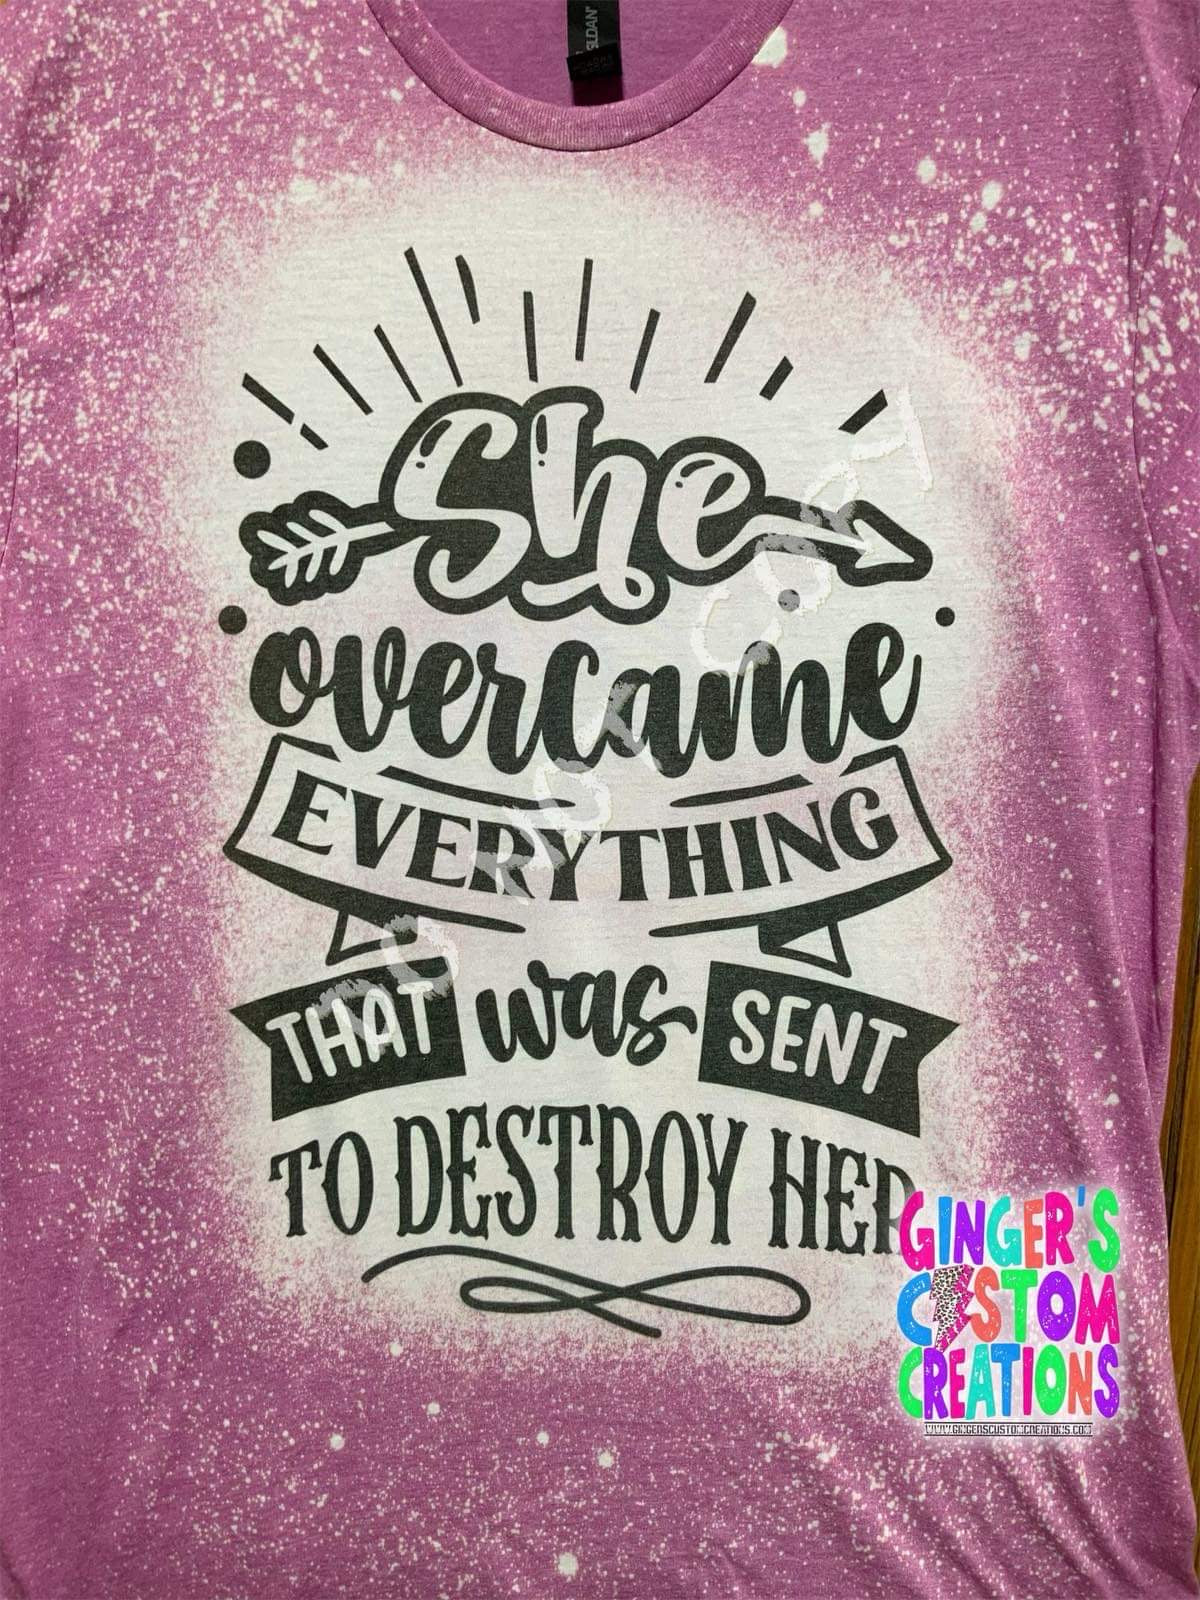 She overcame everything that was sent to destroy her BLEACHED TSHIRT